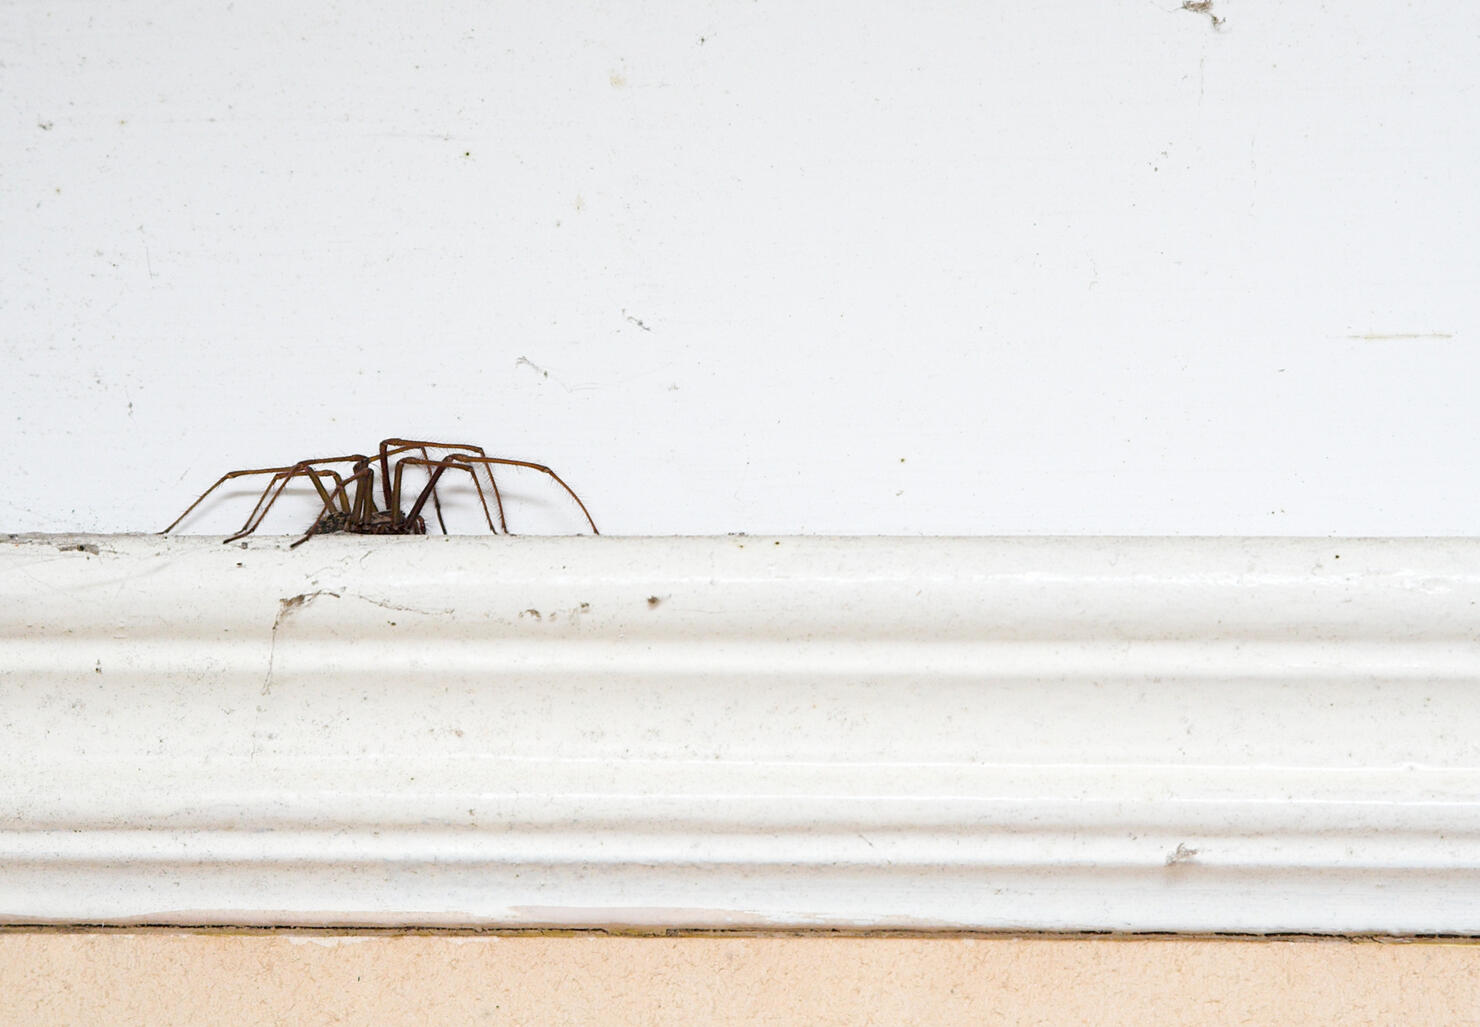 Spider On A Picture Rail